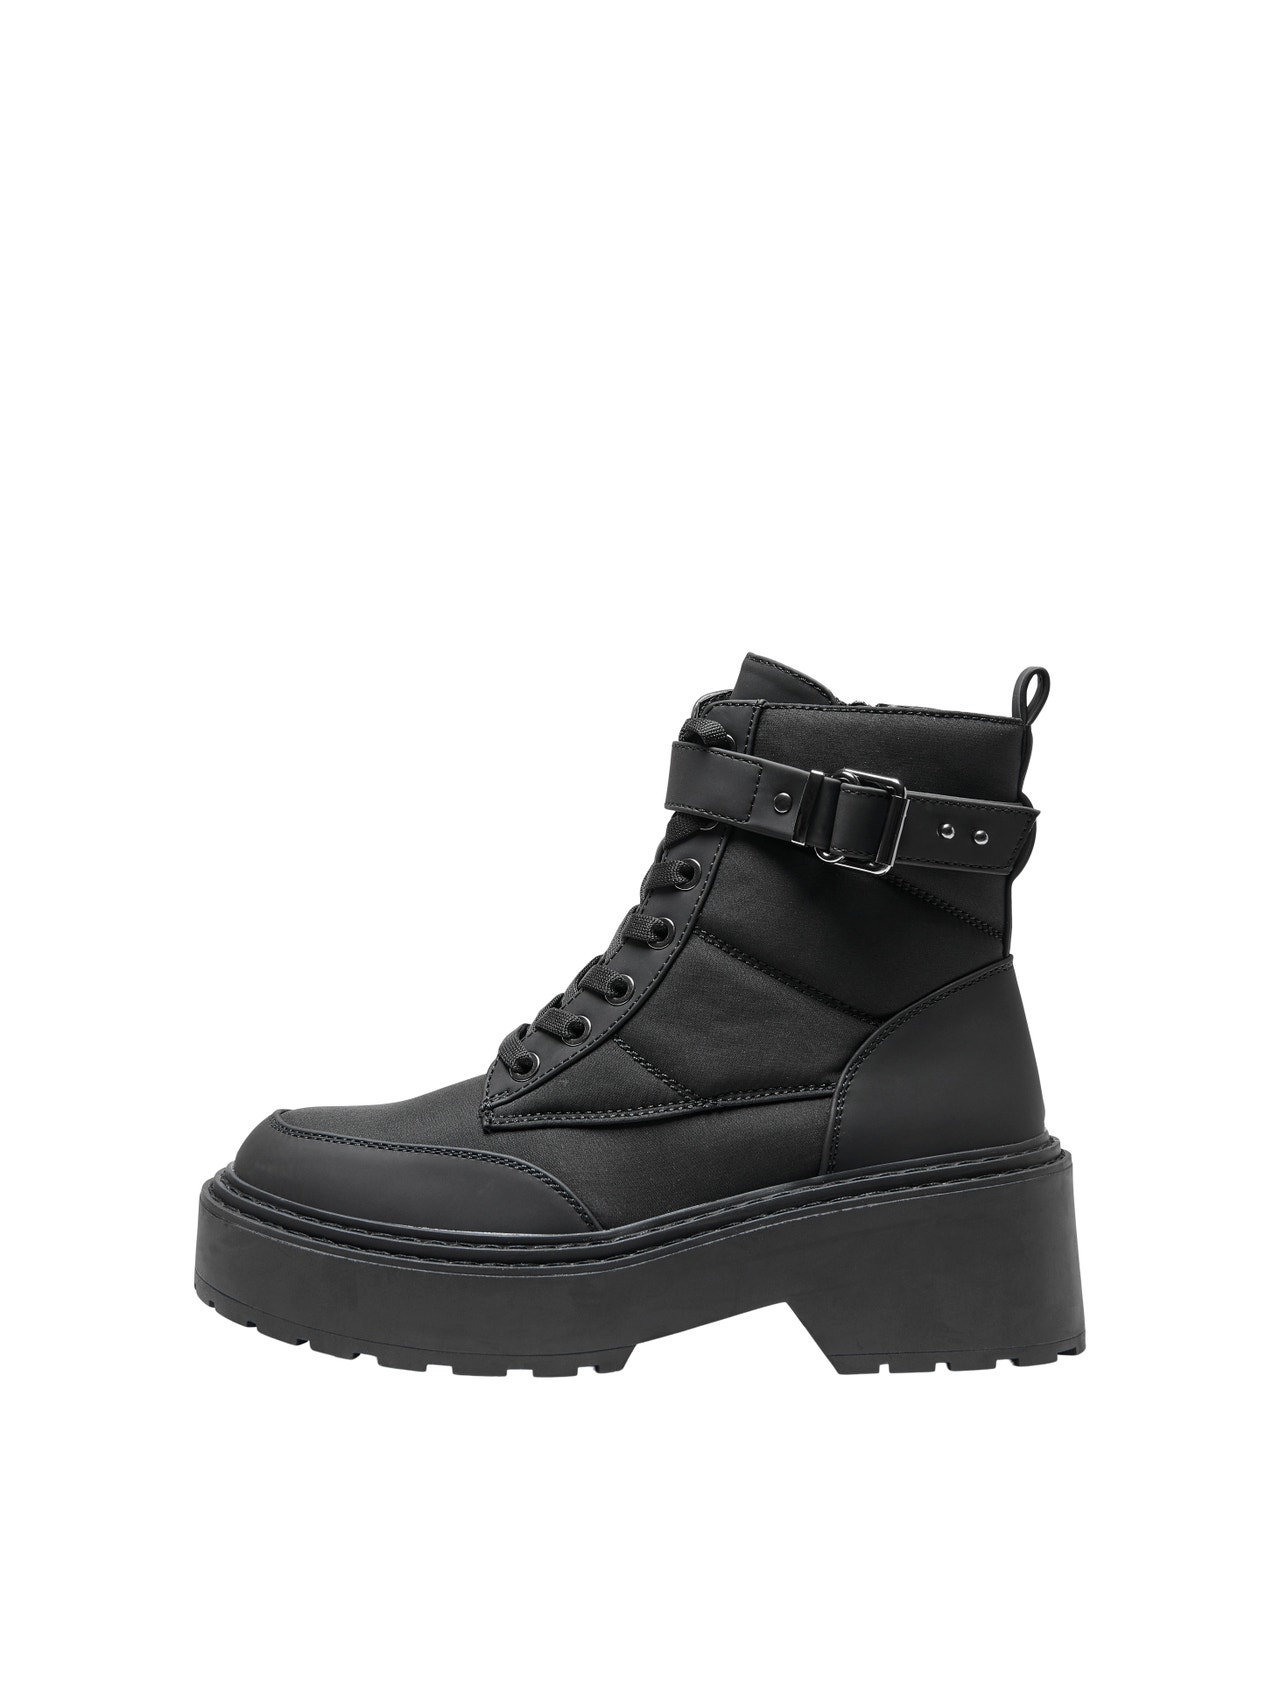 ONLY Boots with adjustable strap -Black - 15271896